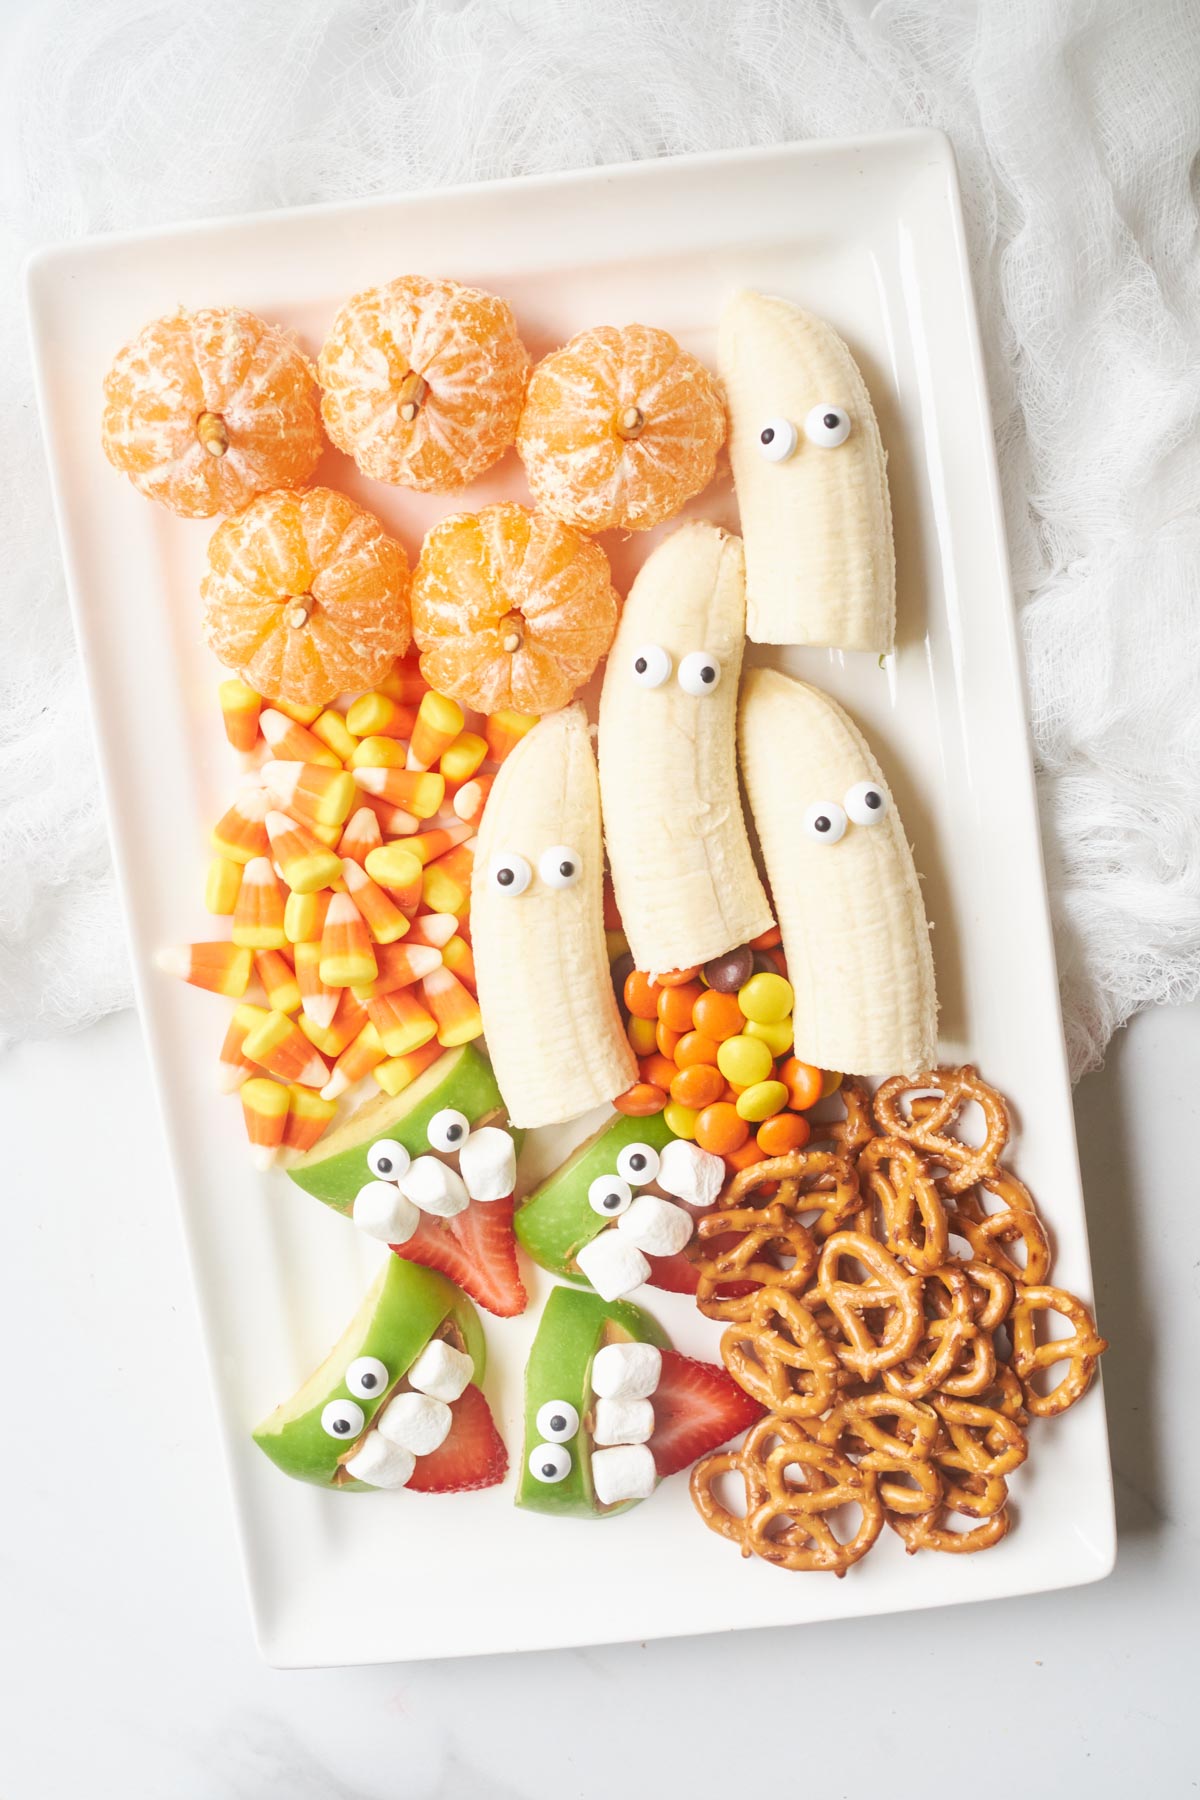 the complete halloween fruit tray